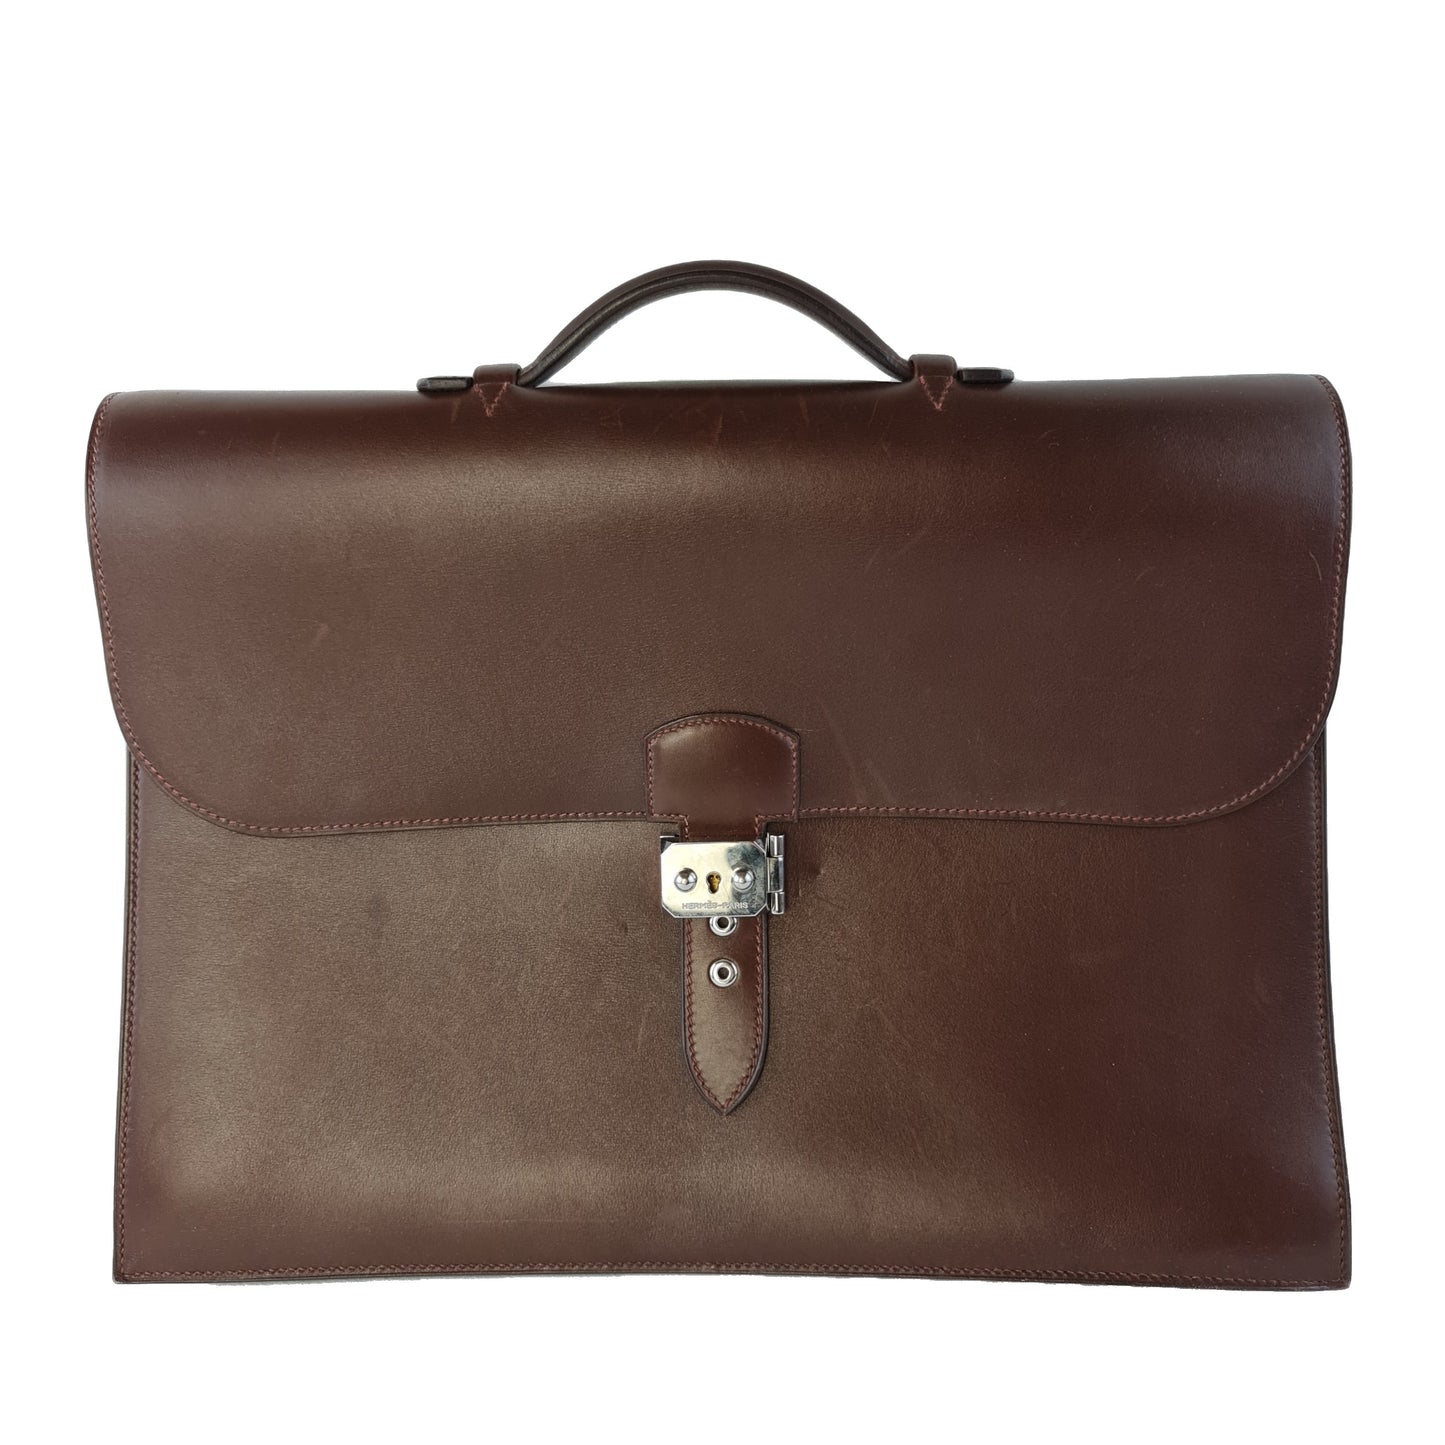 Hermes Hermes Brown Leather Sac a Depeche 40 Briefcase Bag G Square (2003) LVBagaholic